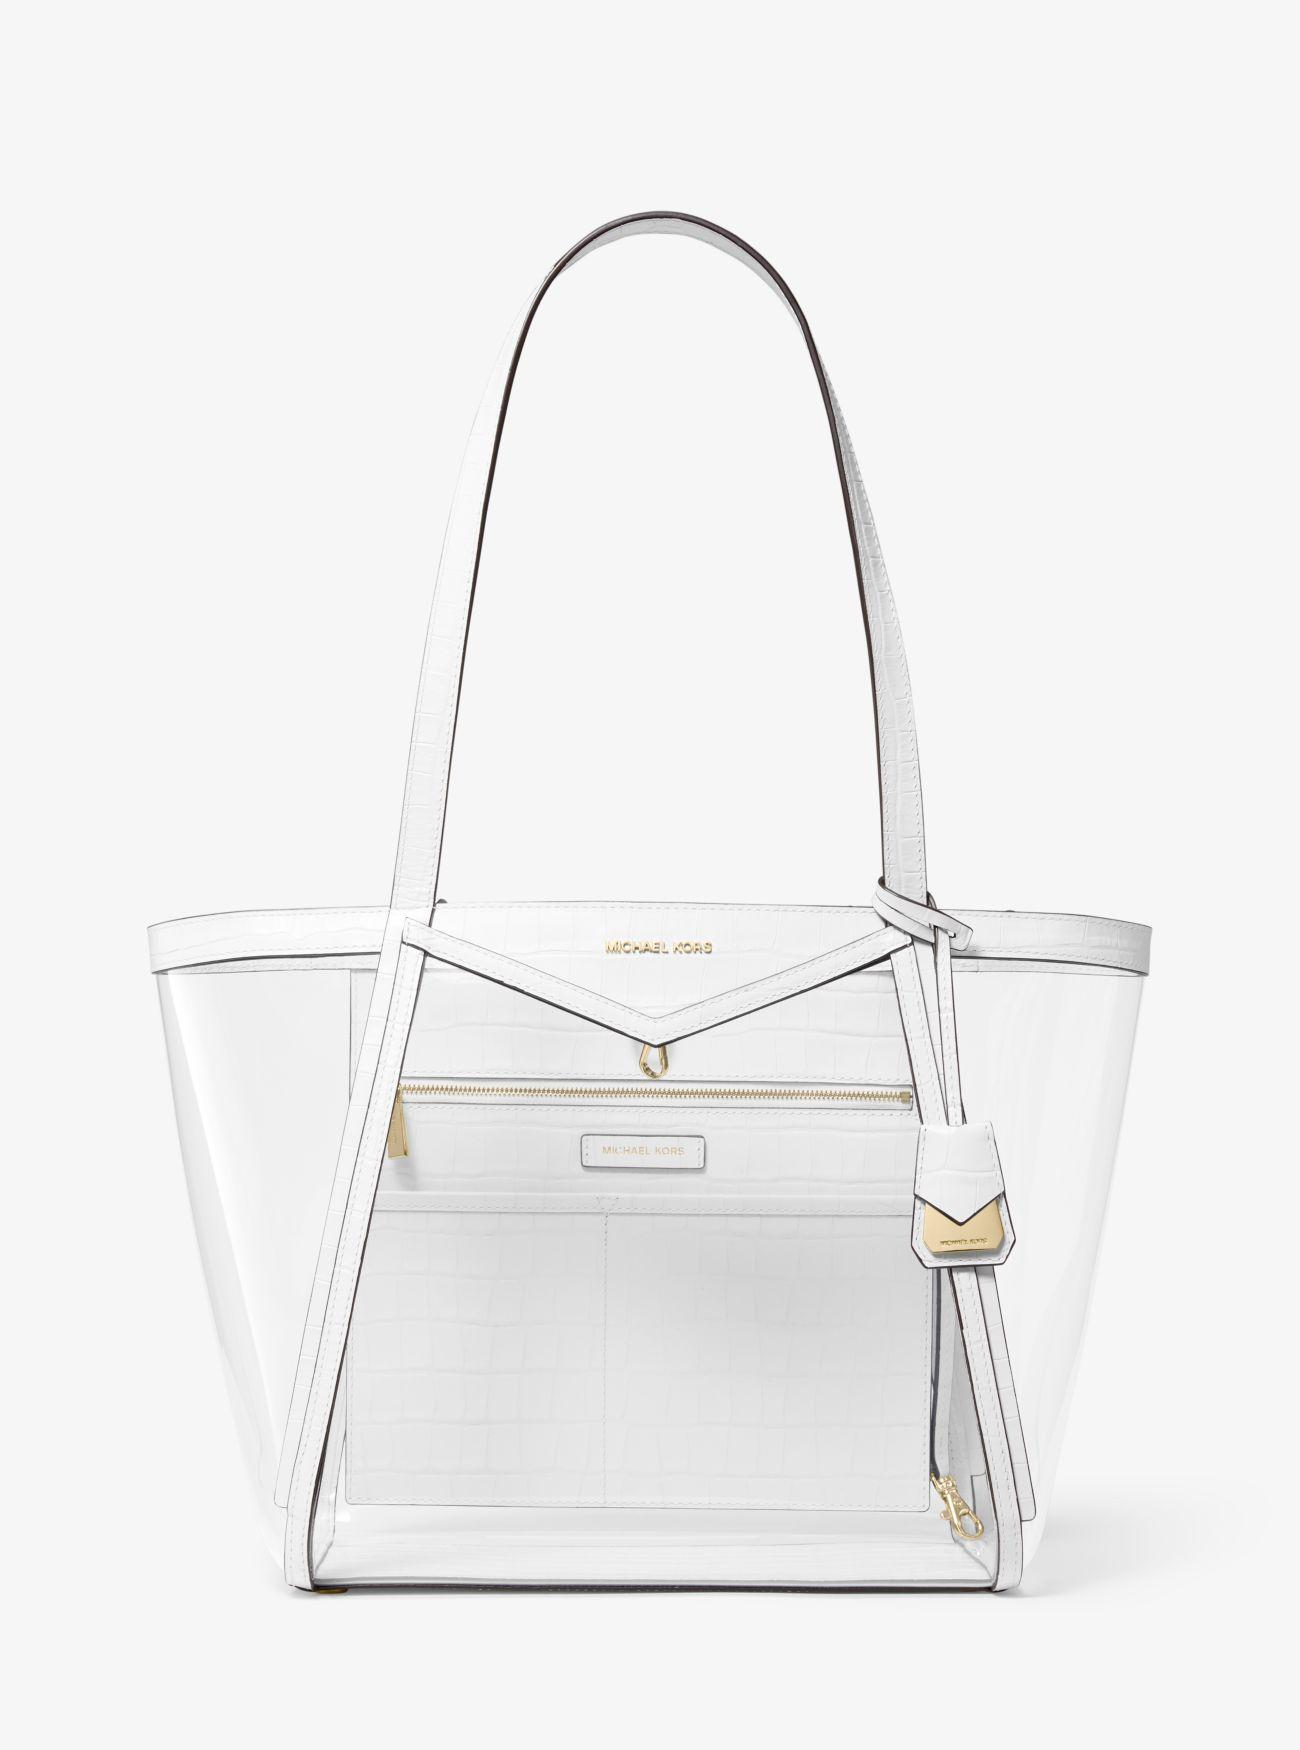 MICHAEL Michael Kors Whitney Large Clear And Leather Tote Bag in White - Lyst